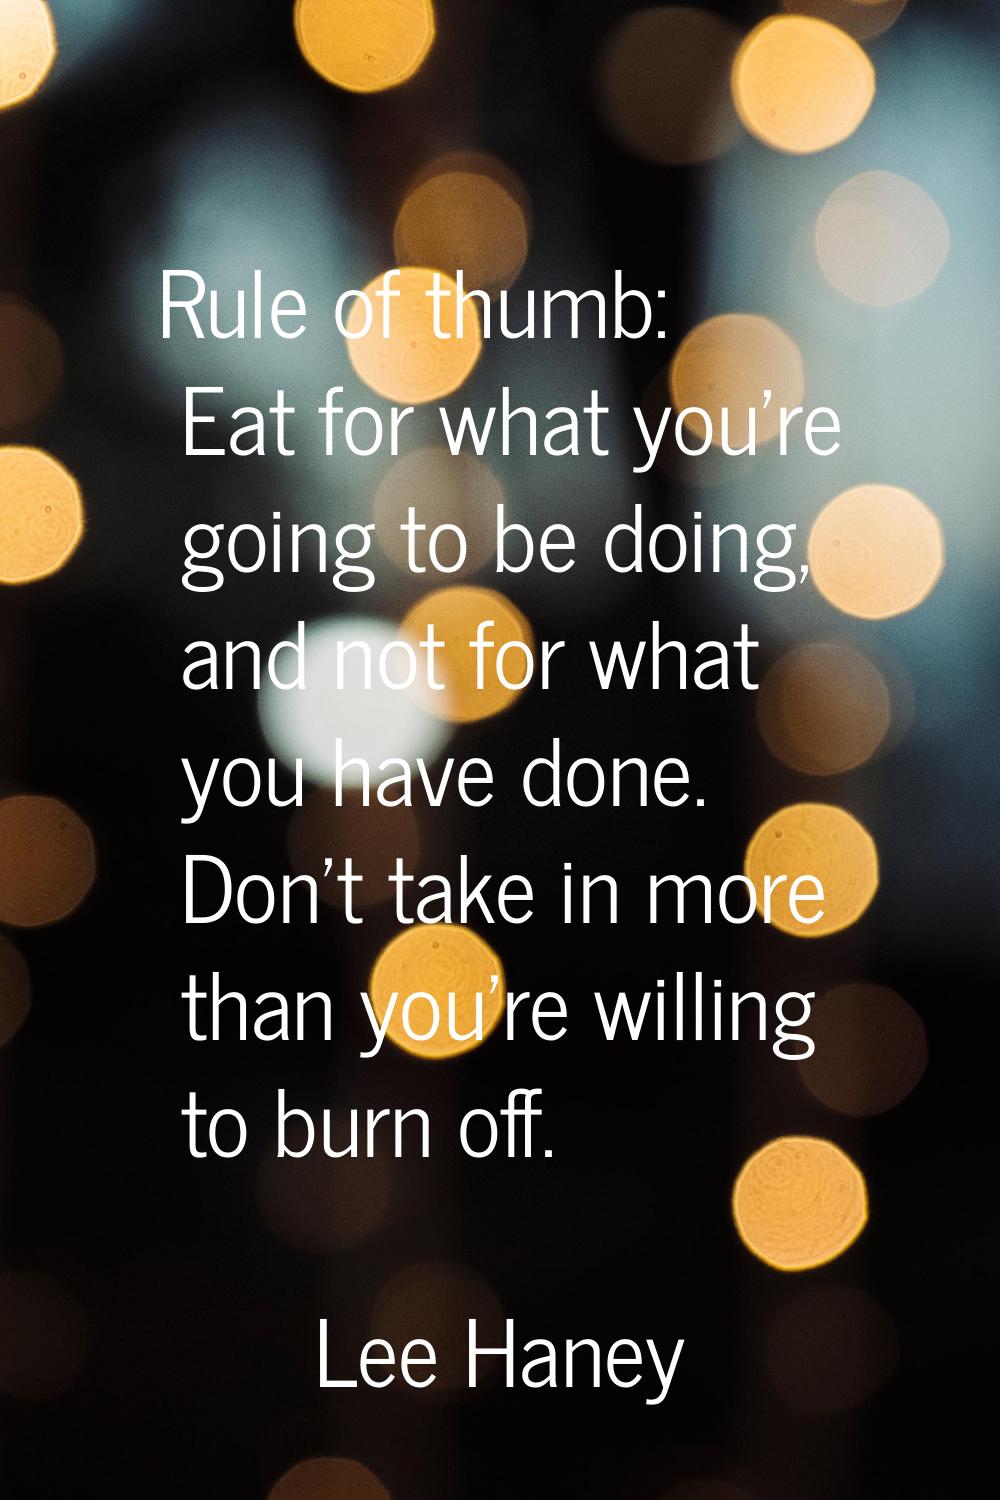 Rule of thumb: Eat for what you're going to be doing, and not for what you have done. Don't take in